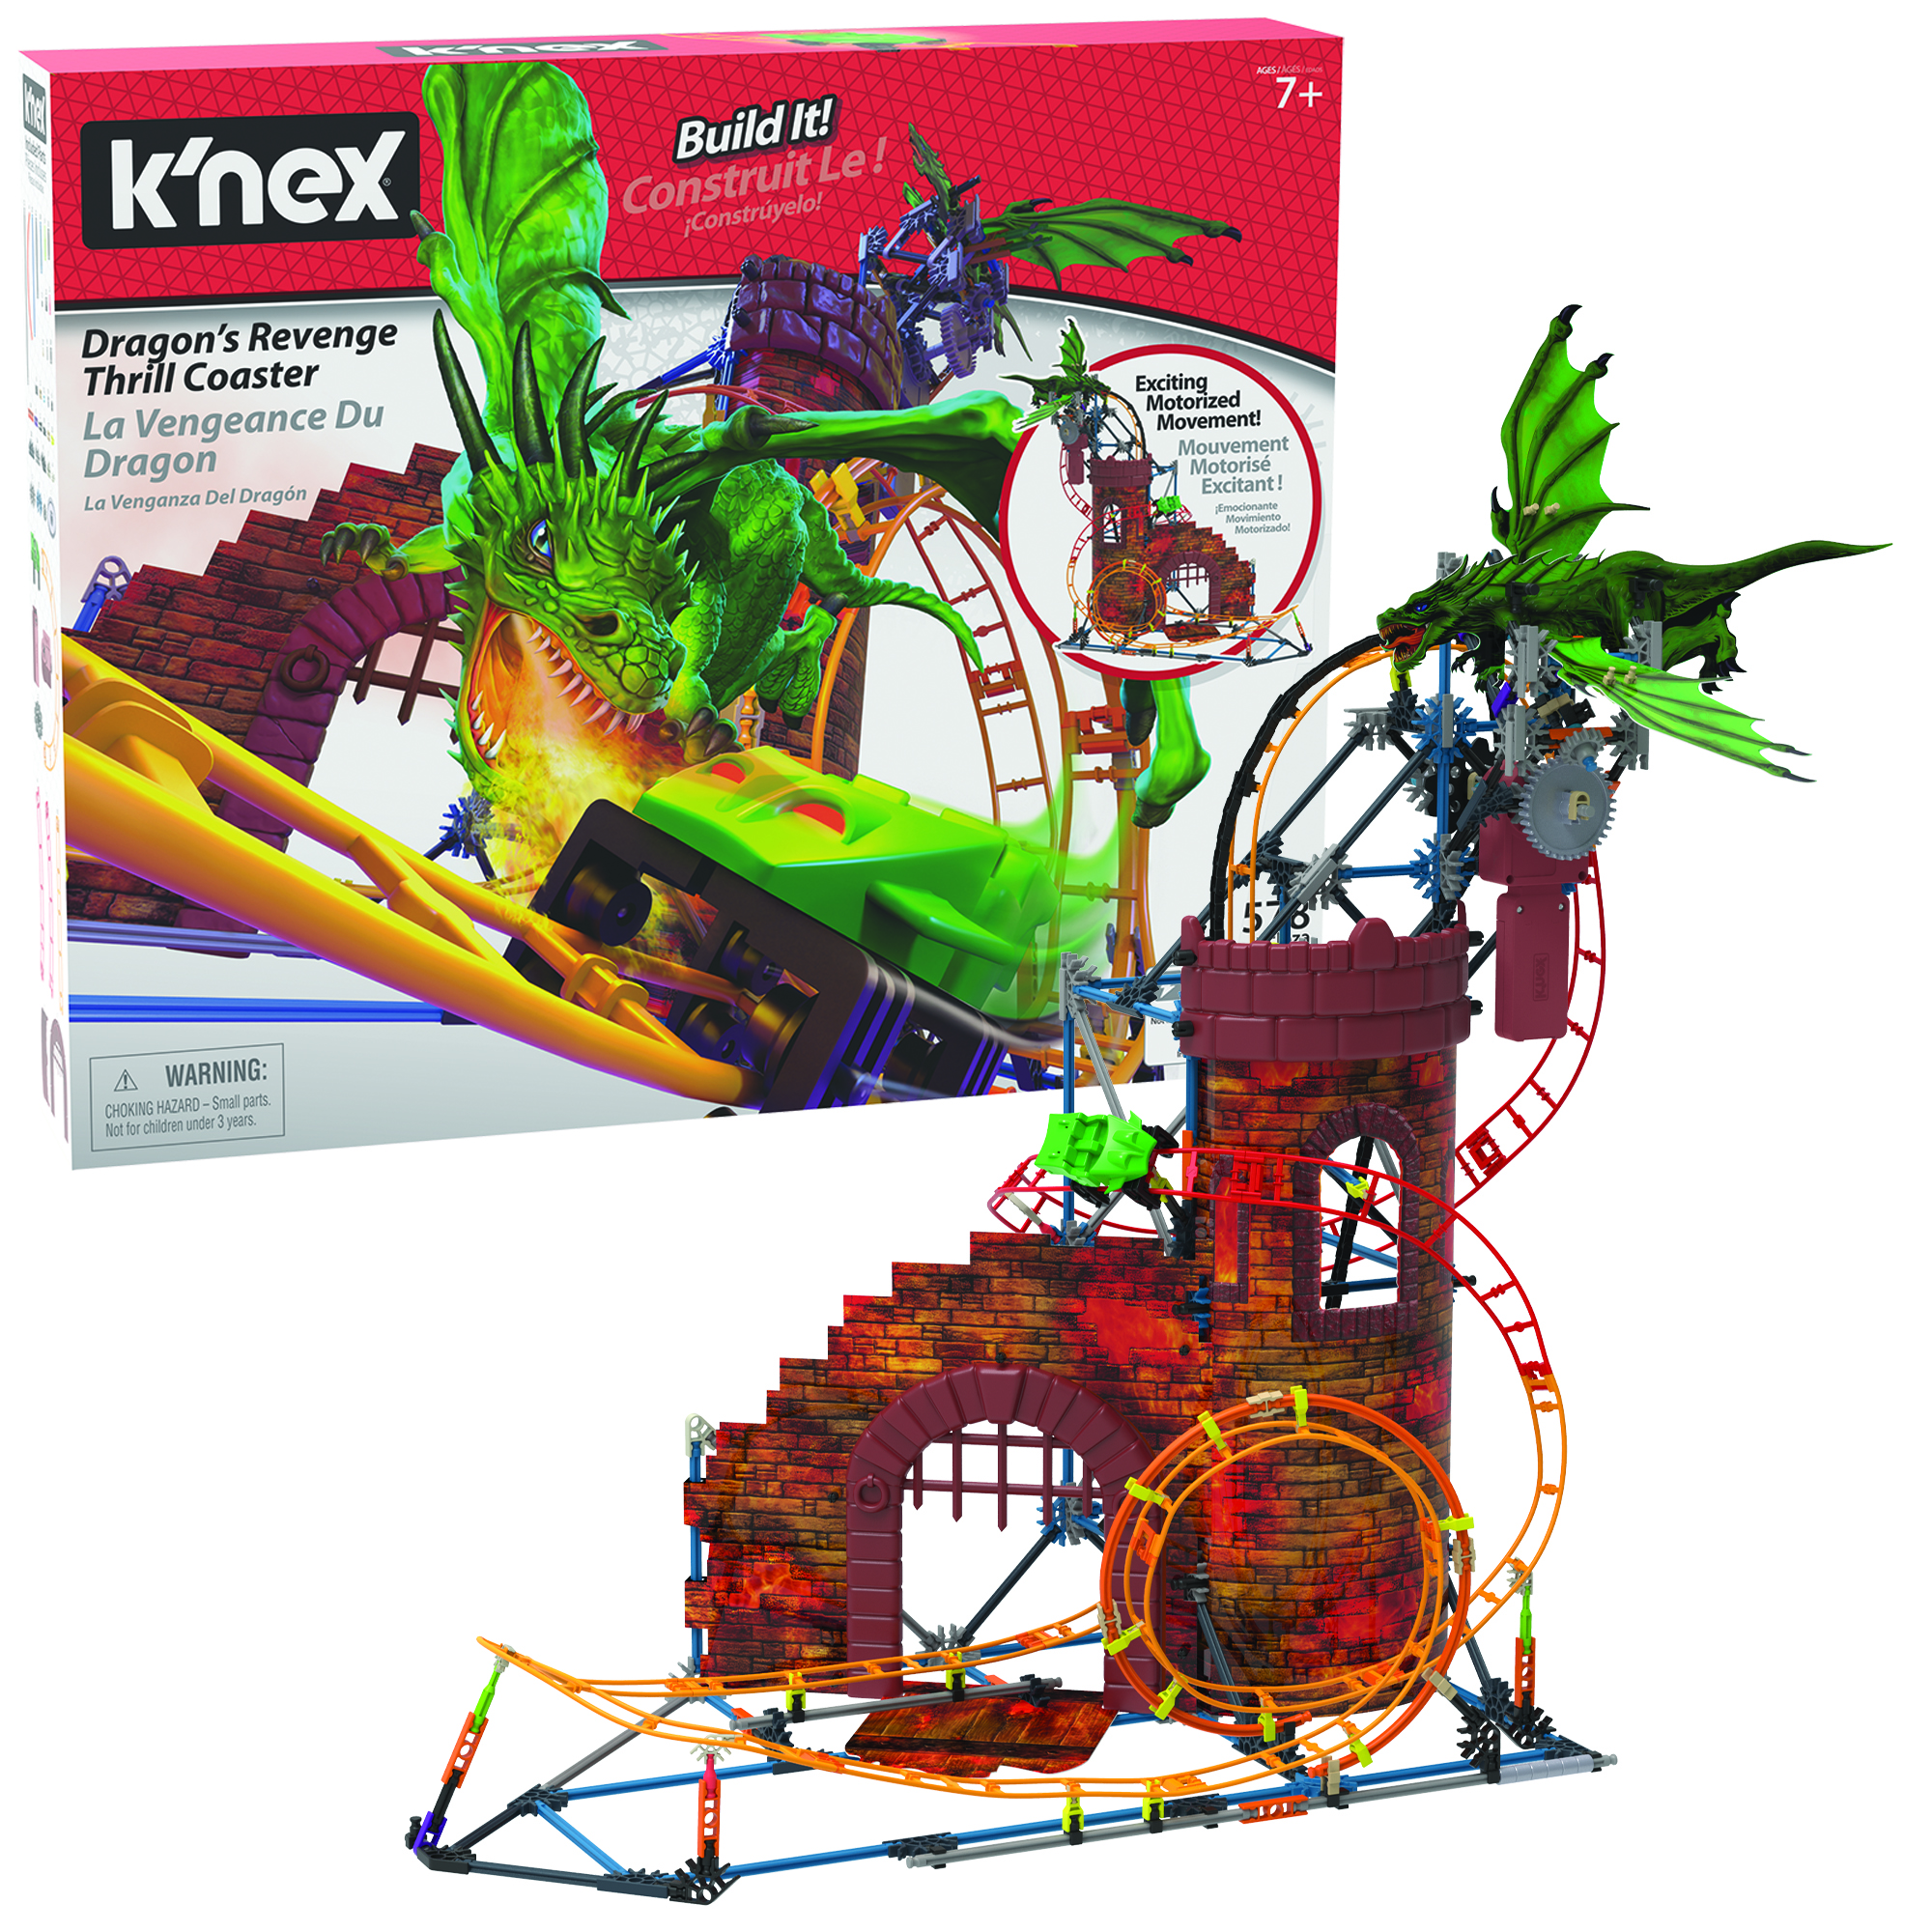 K'NEX Dragon's Revenge Thrill Coaster - 578 Parts - Roller Coaster Toy - Ages 9 and up - image 1 of 11